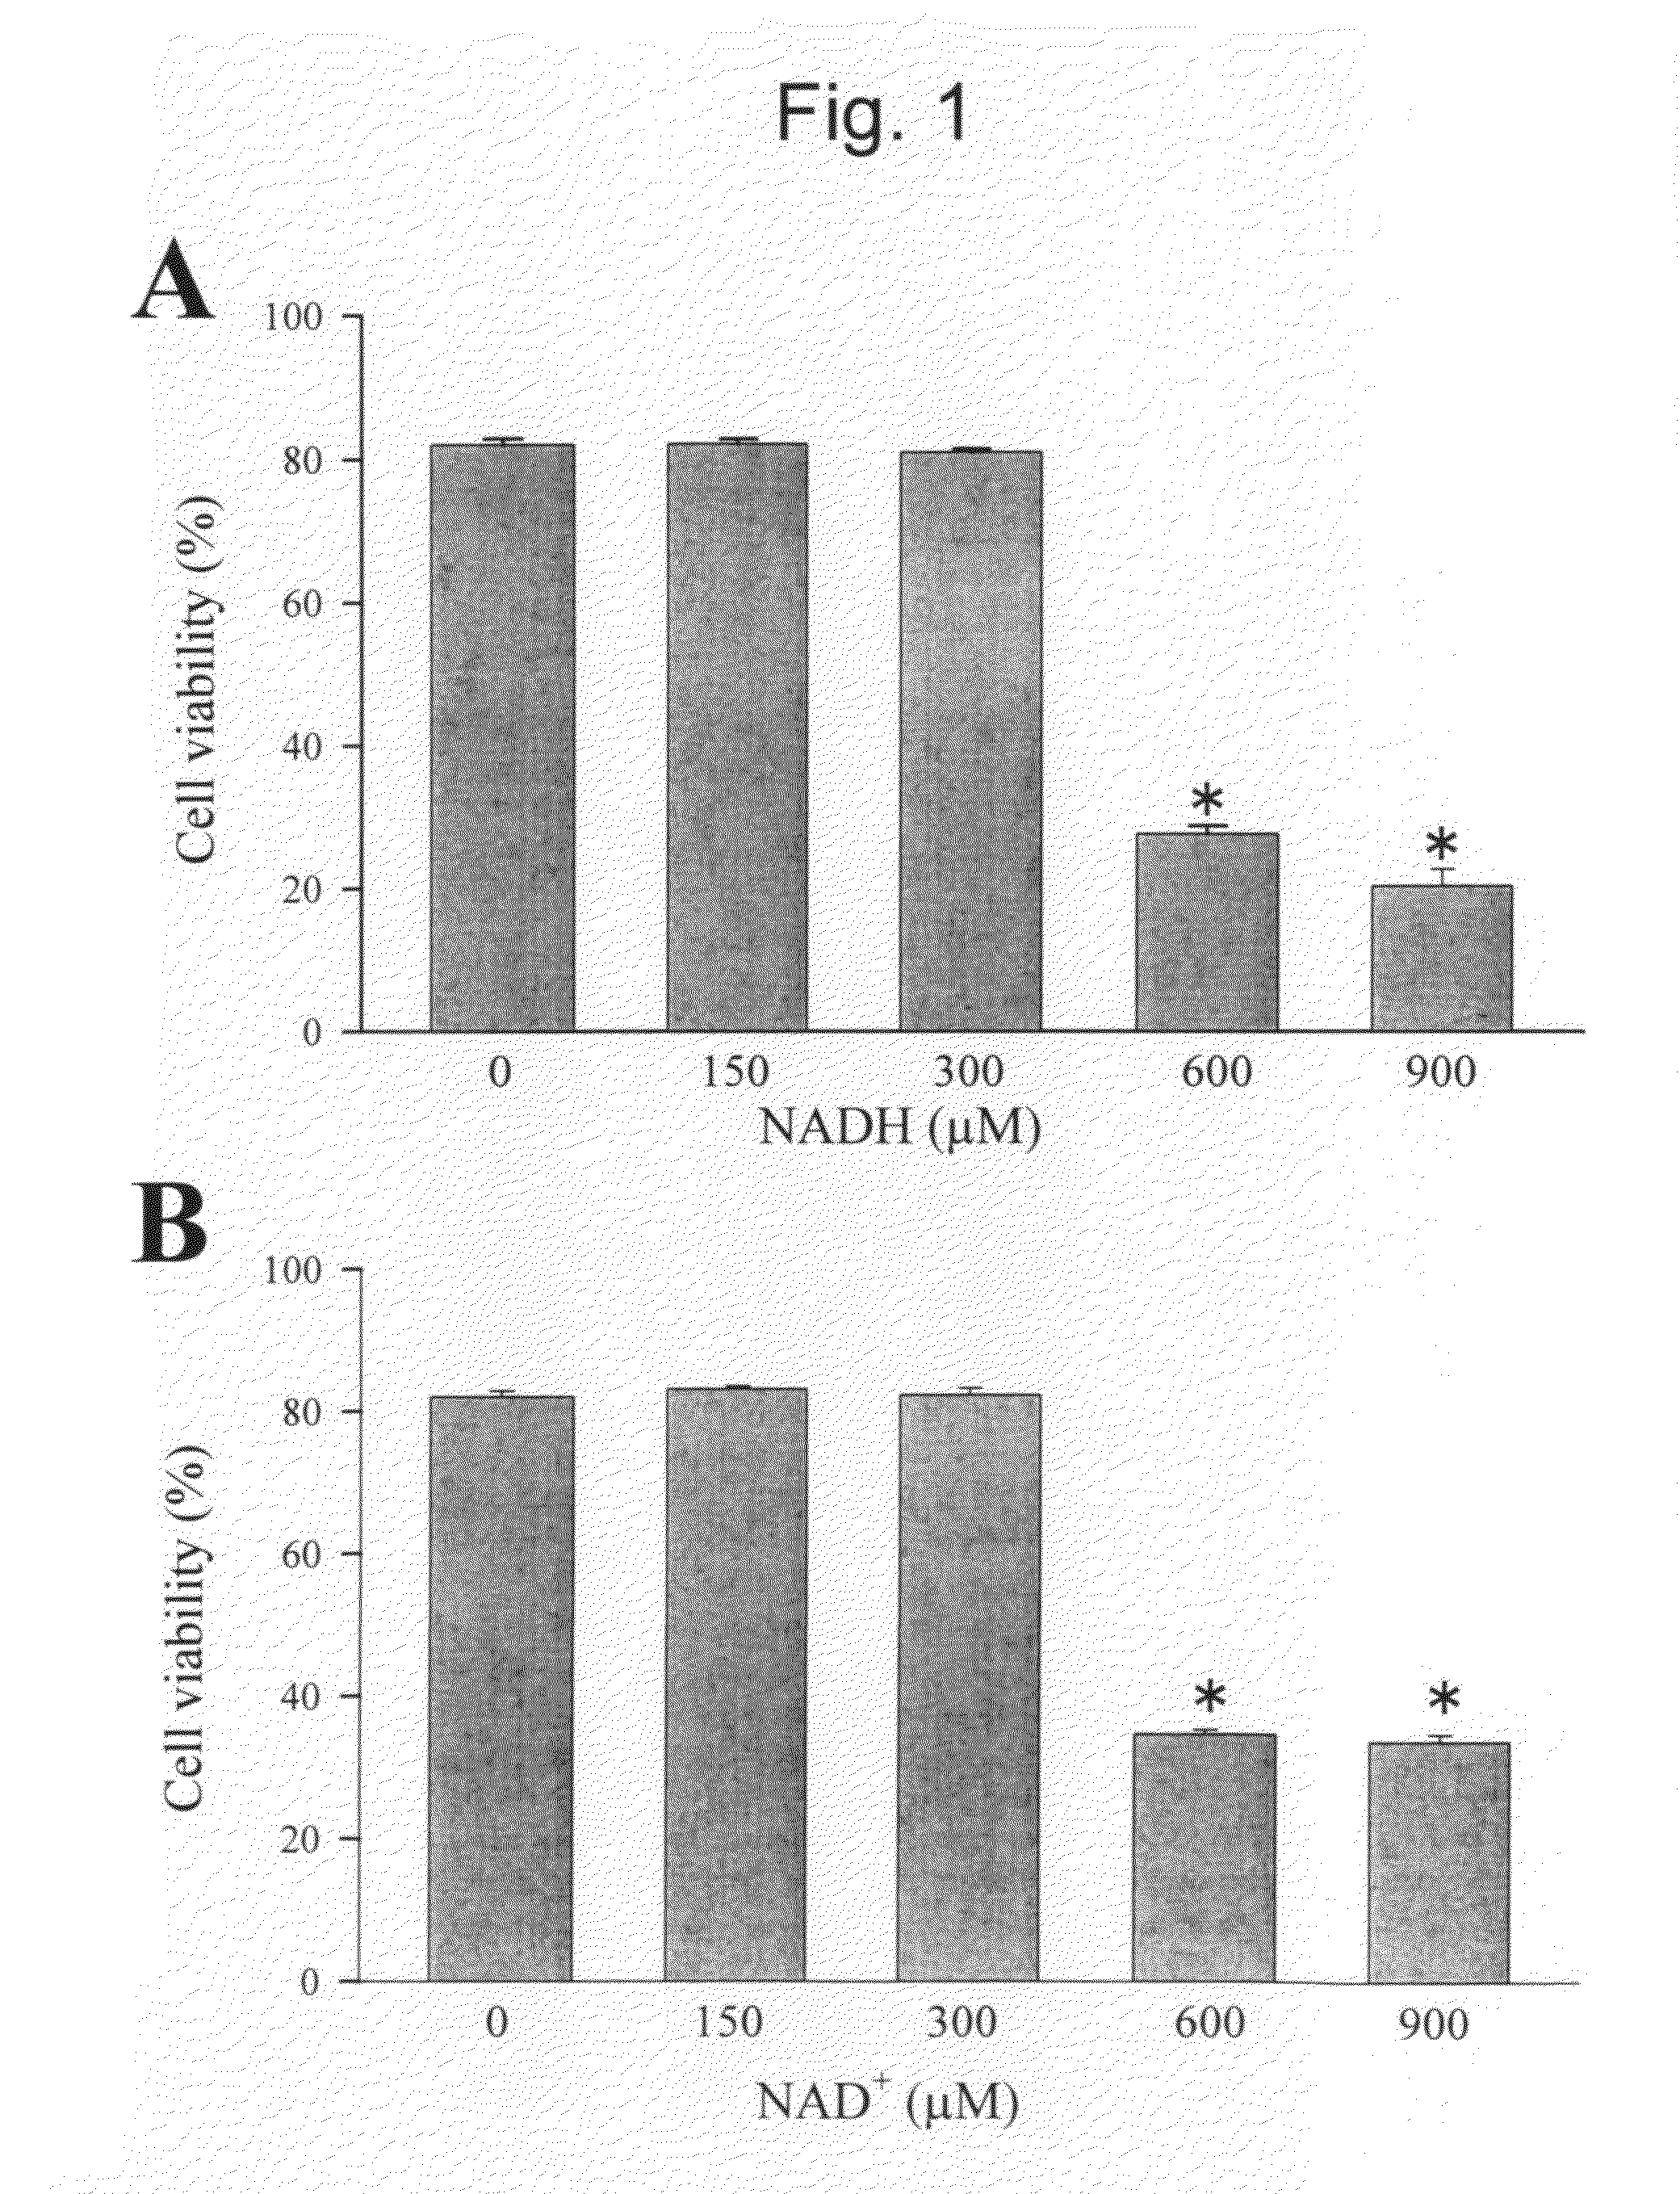 Modulation of sodium channels by nicotinamide adenine dinucleotide